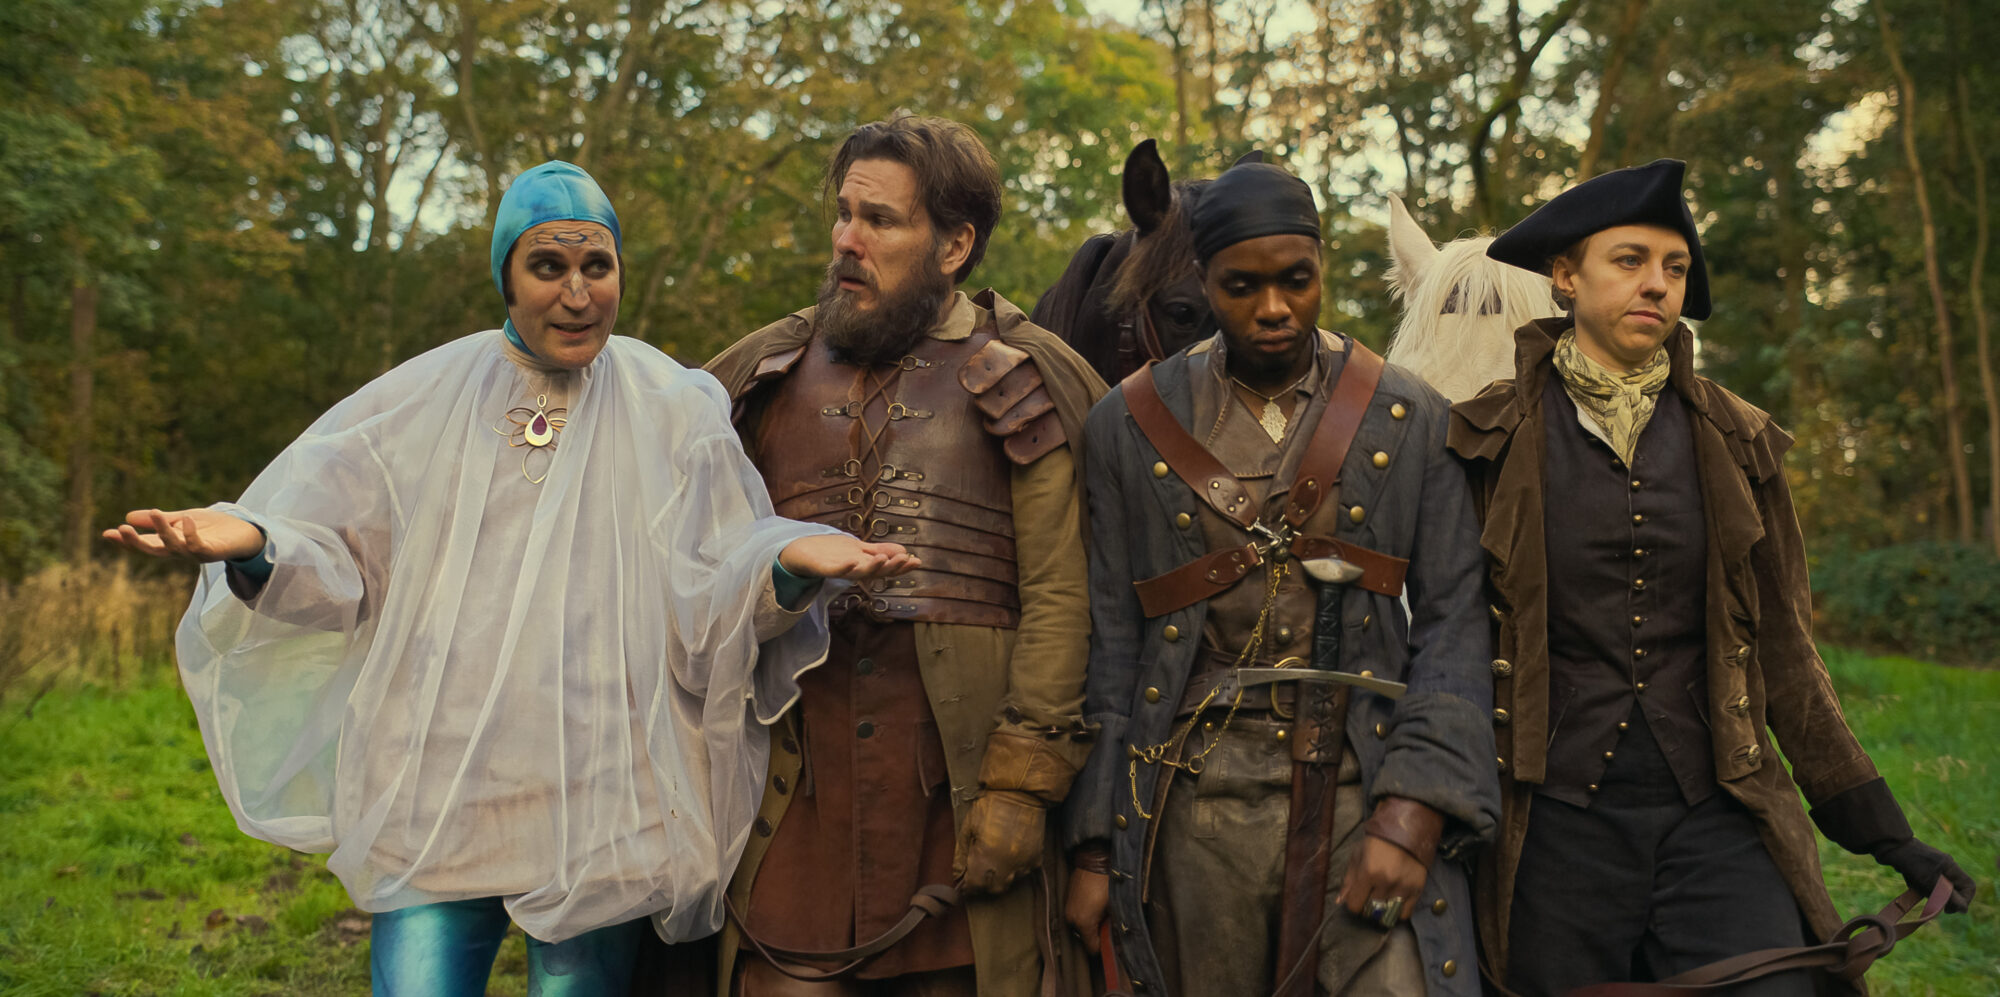 Dick Turpin is dressed up as a man from the future, with a blue cap and a poncho, walking with his new gang mates who are dressed up in more period appropriate clothing from The Completely Made-Up Adventures of Dick Turpin